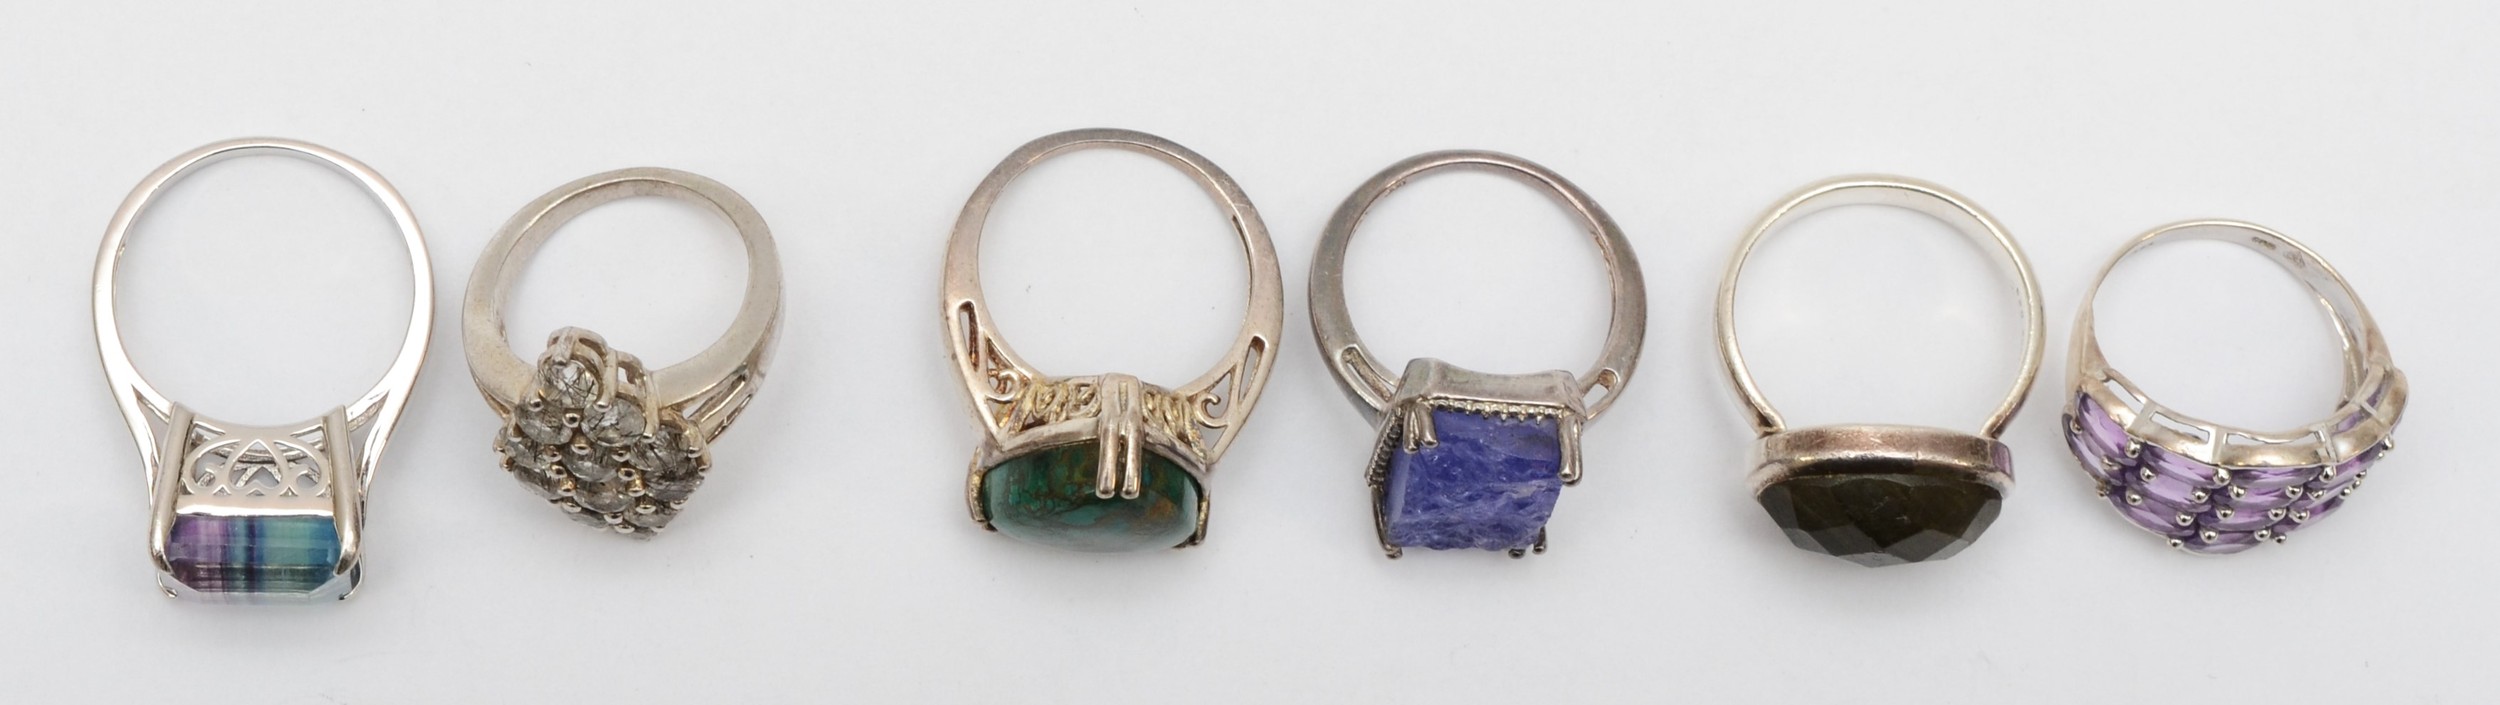 Six various silver gemset dress rings, L - R, 31gm - Image 2 of 2